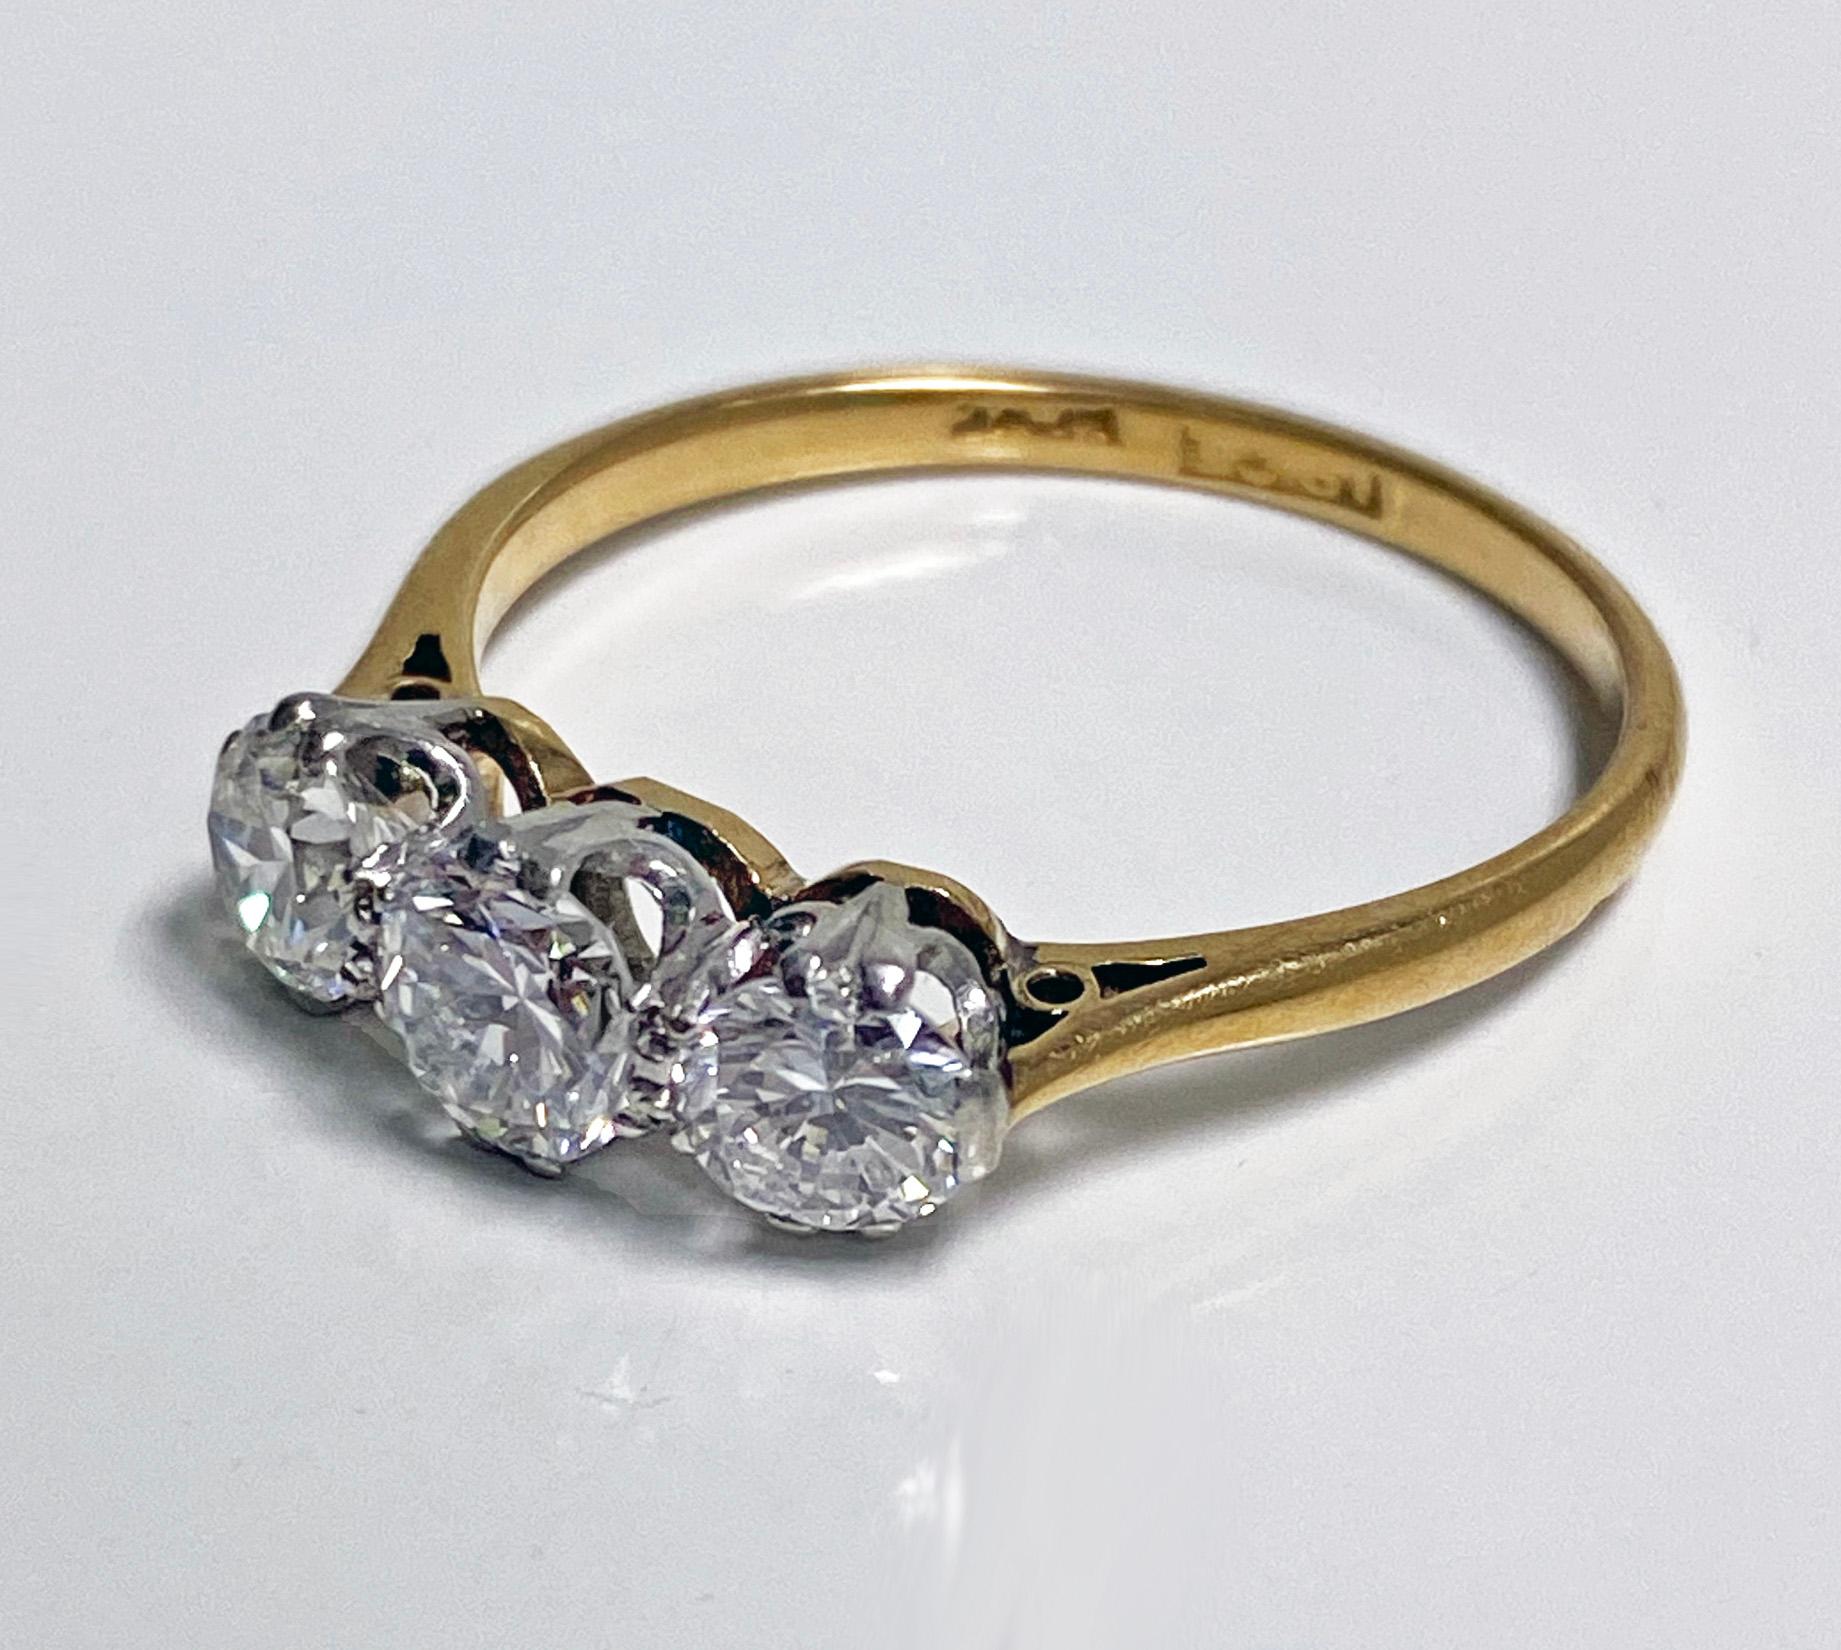 Antique 18K Platinum Diamond Ring, C.1920. The three stone diamond Ring set with three early round brilliant cut diamonds approximately 1.14 cts total diamond weight, average VS clarity, average H-I colour, plain basket setting and shank. Centre